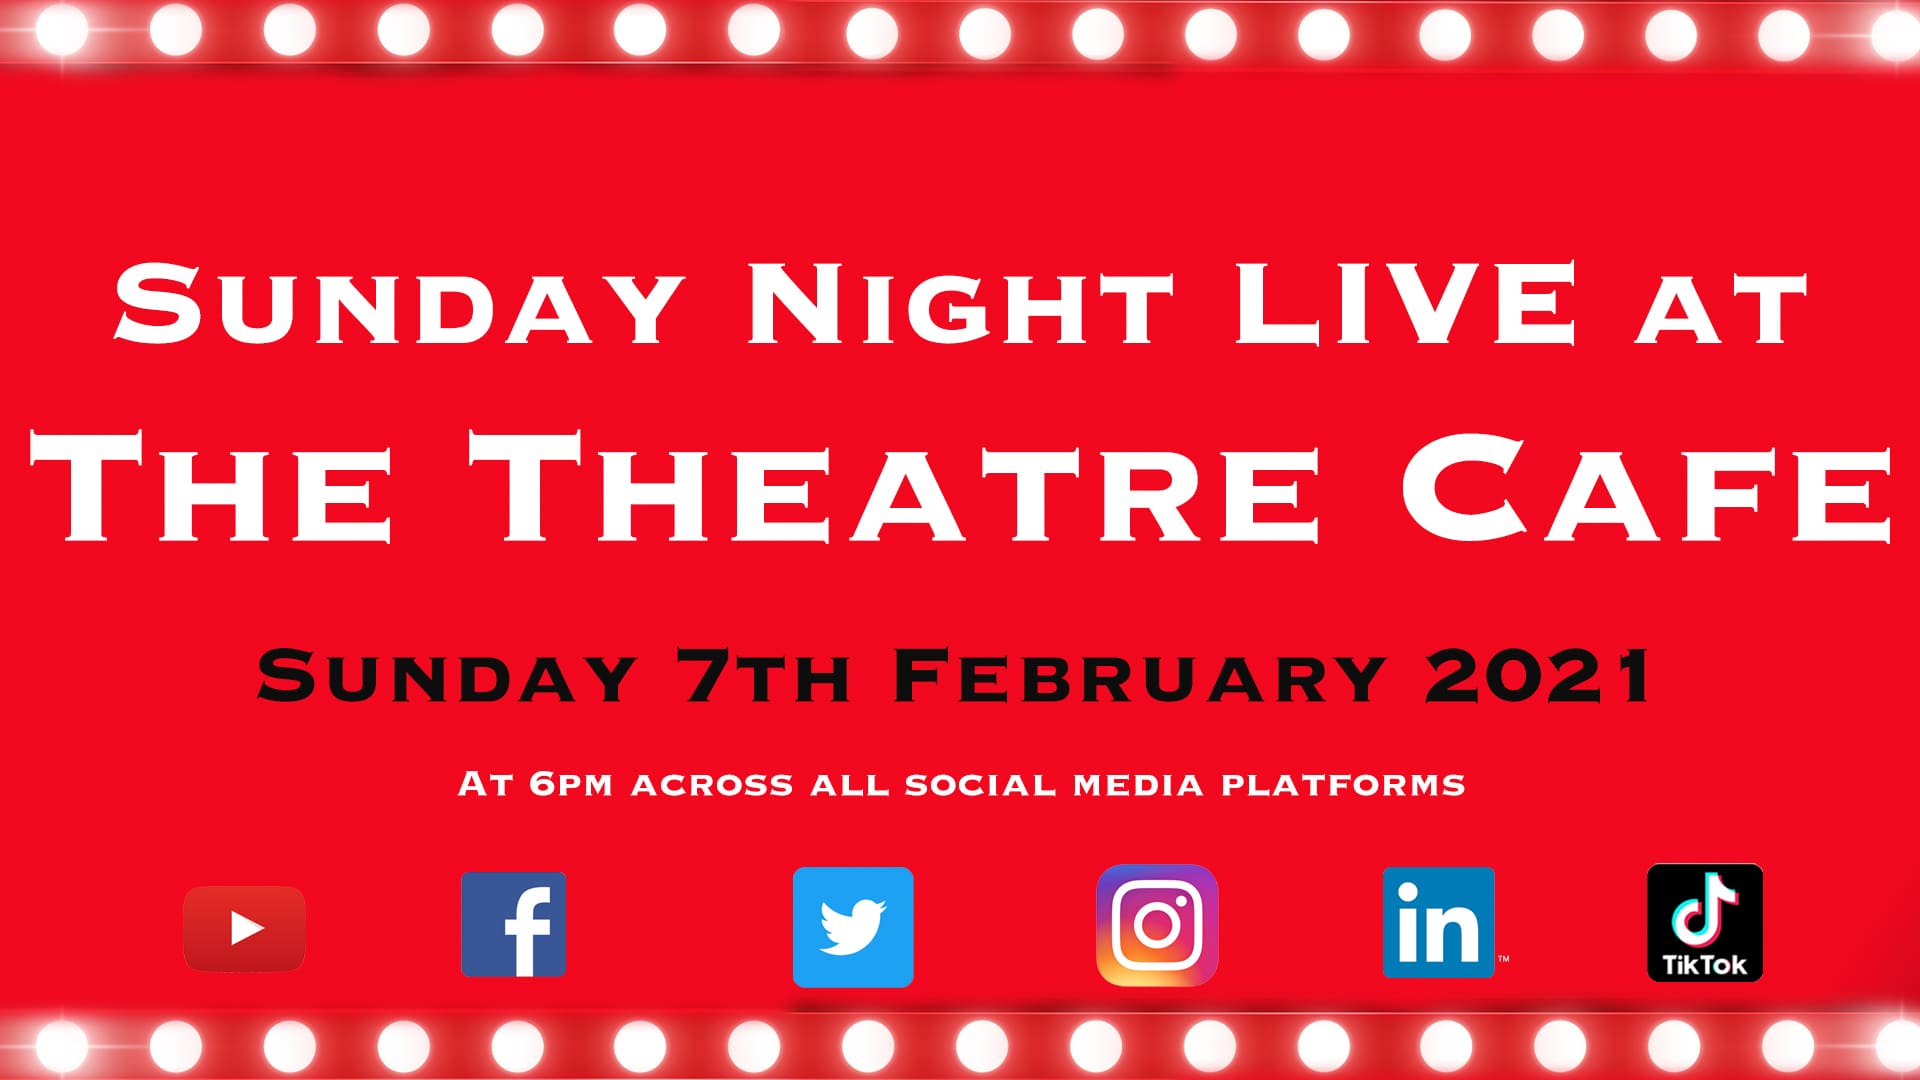 News: The Theatre Café presents Sunday Night Live – an hour of free entertainment